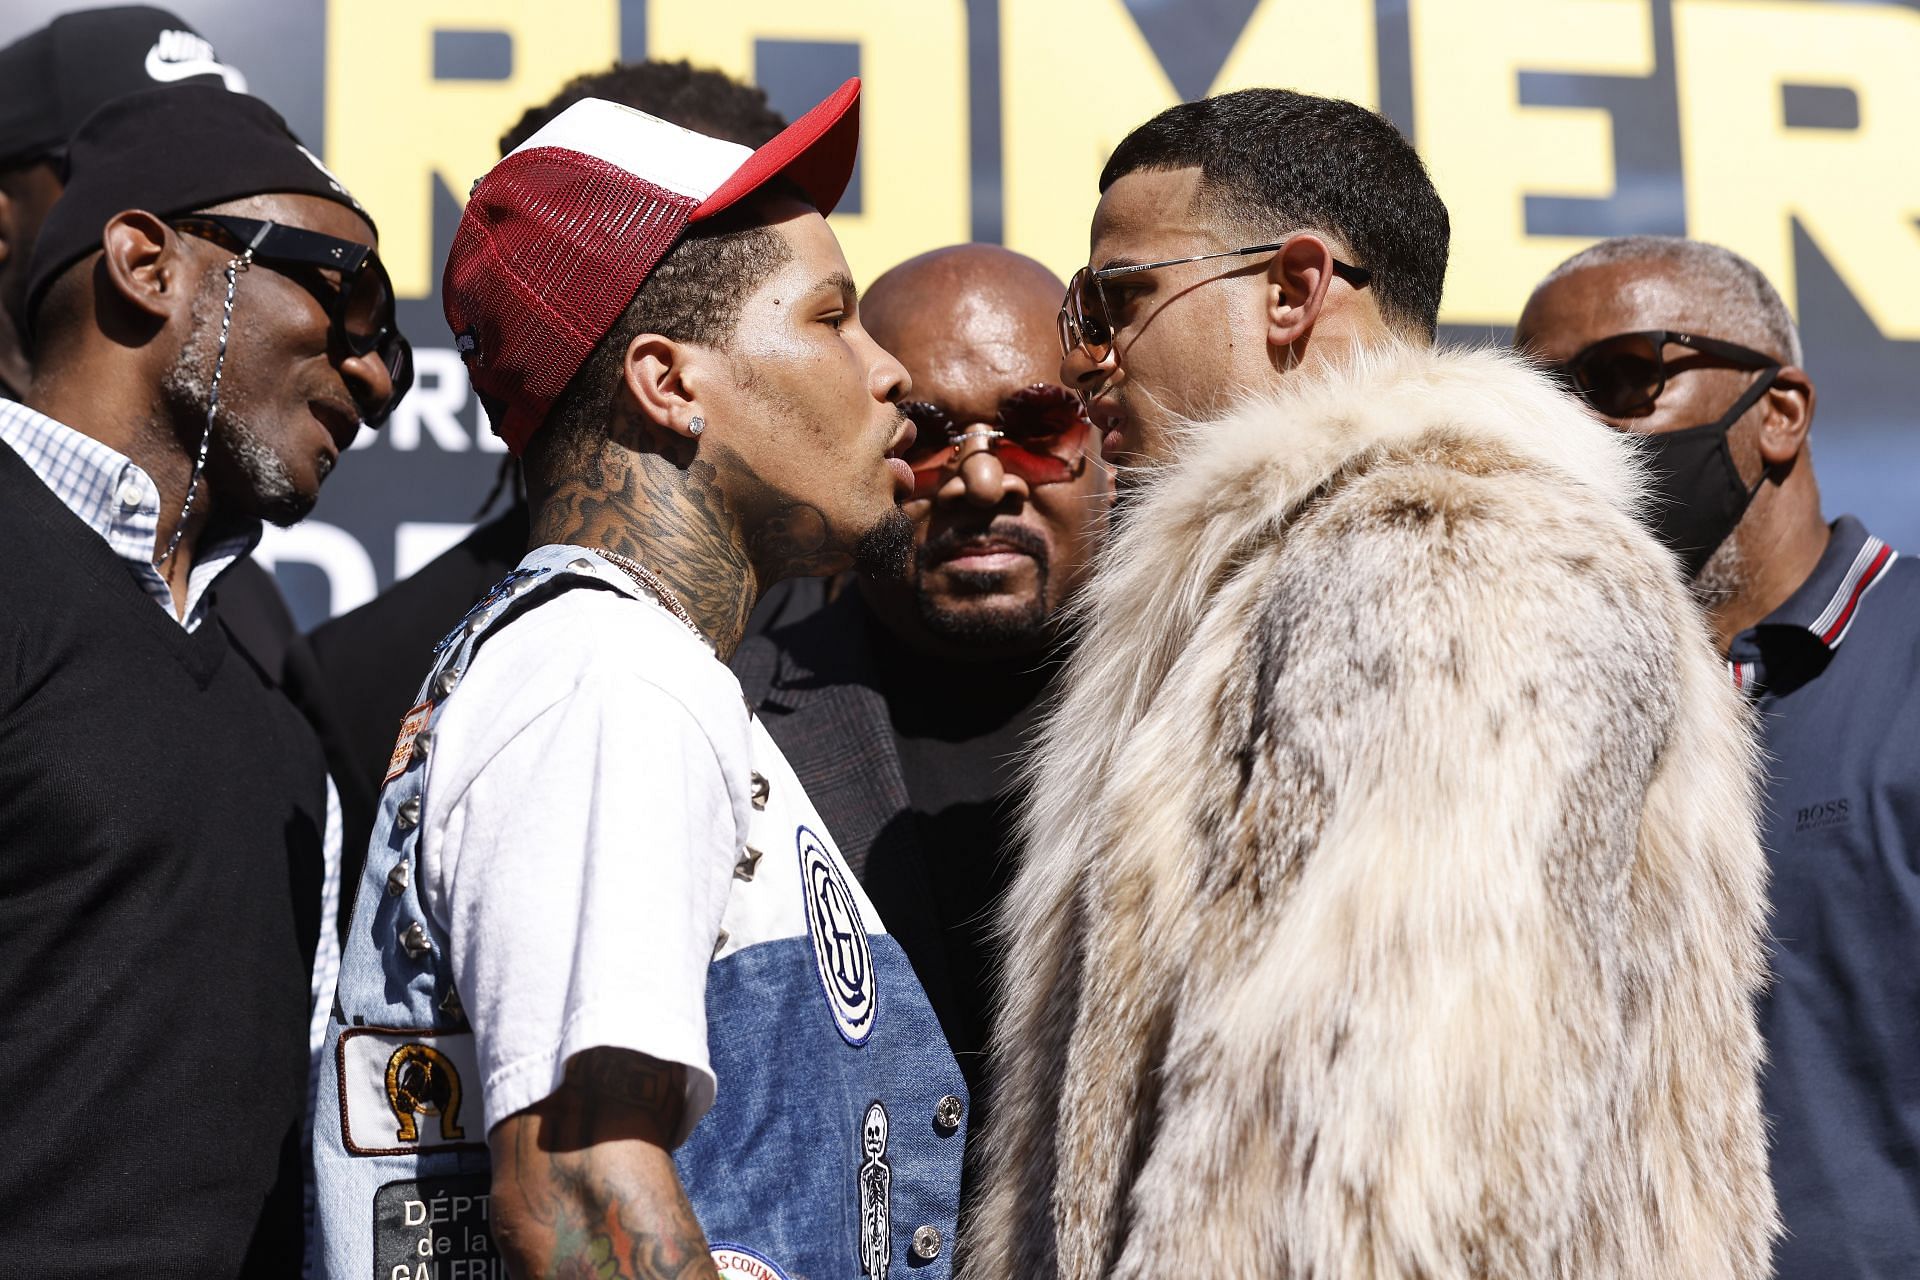 Gervonta Davis (L) and Rolly Romero (R) are now once again set to square off